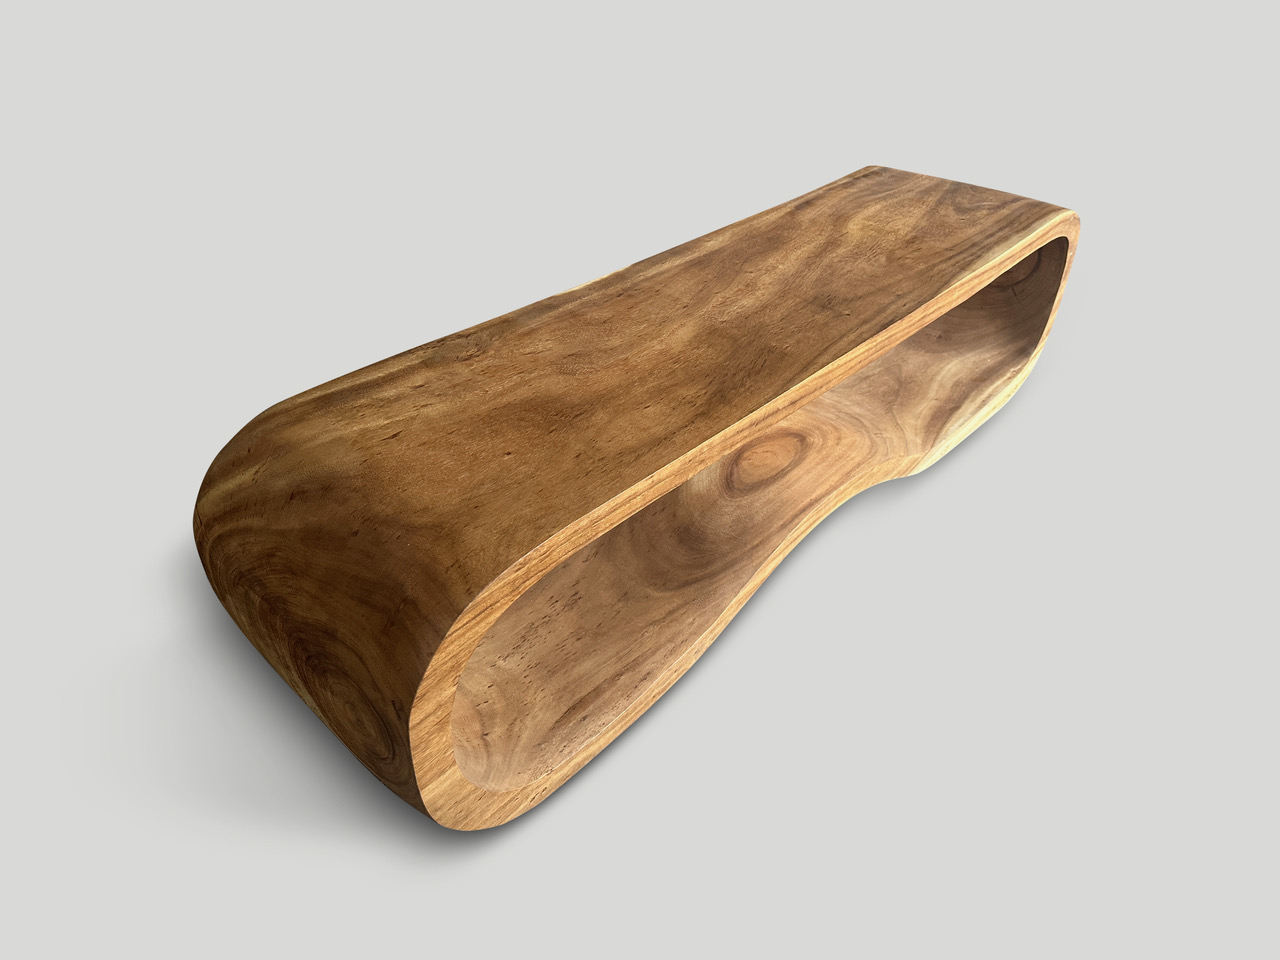 MINIMALIST SCULPTURAL BENCH OR COFFEE TABLE